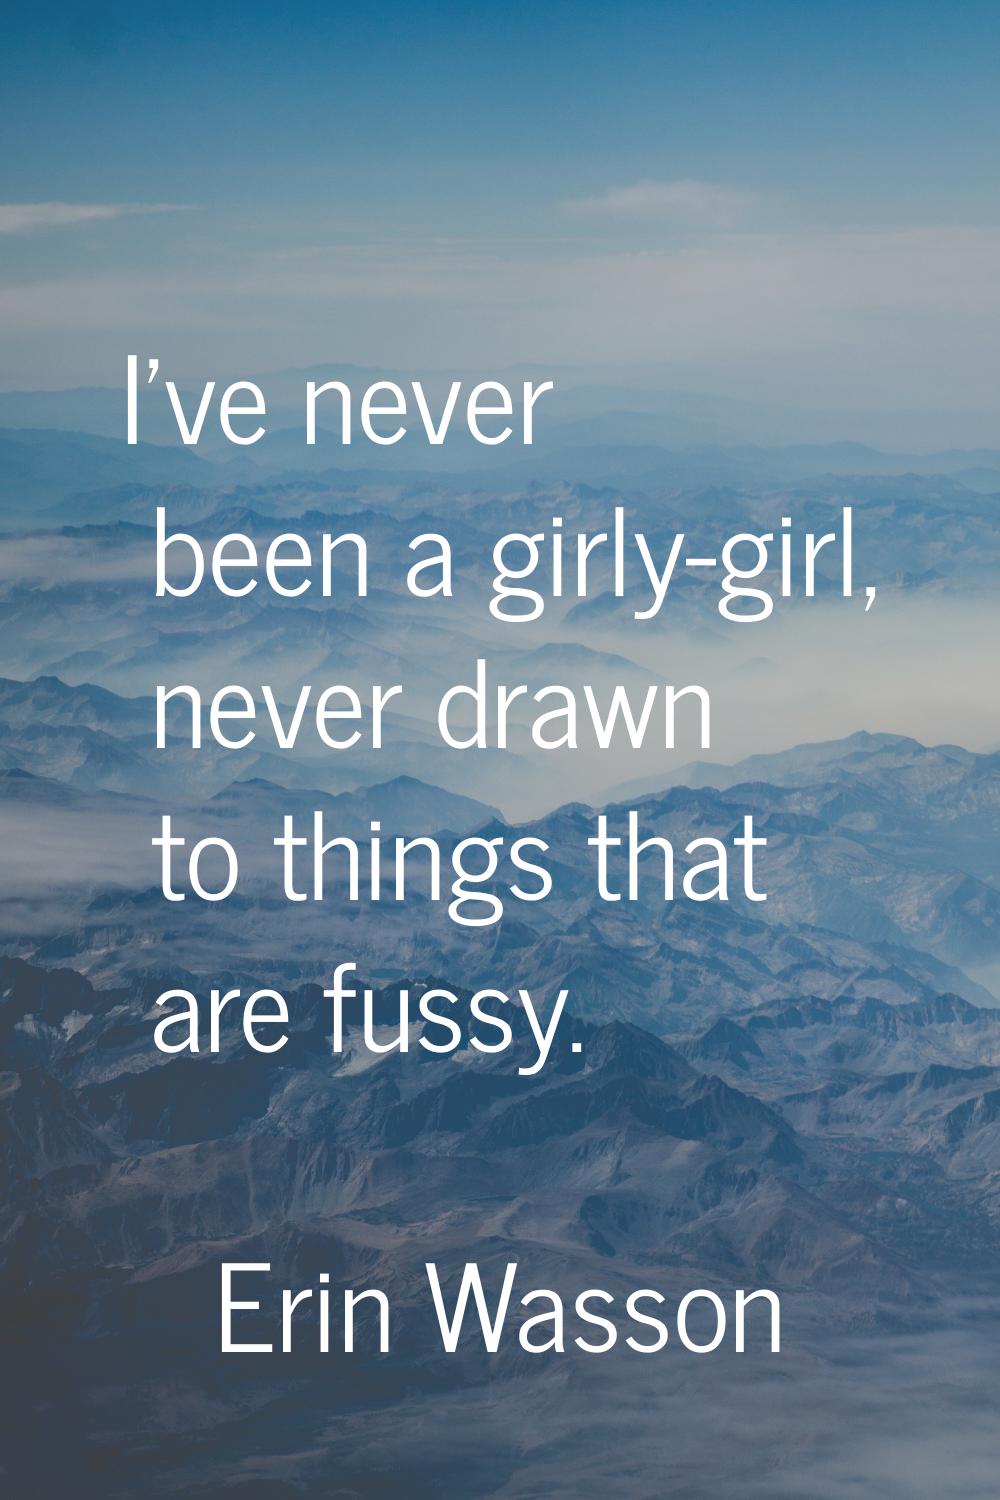 I've never been a girly-girl, never drawn to things that are fussy.